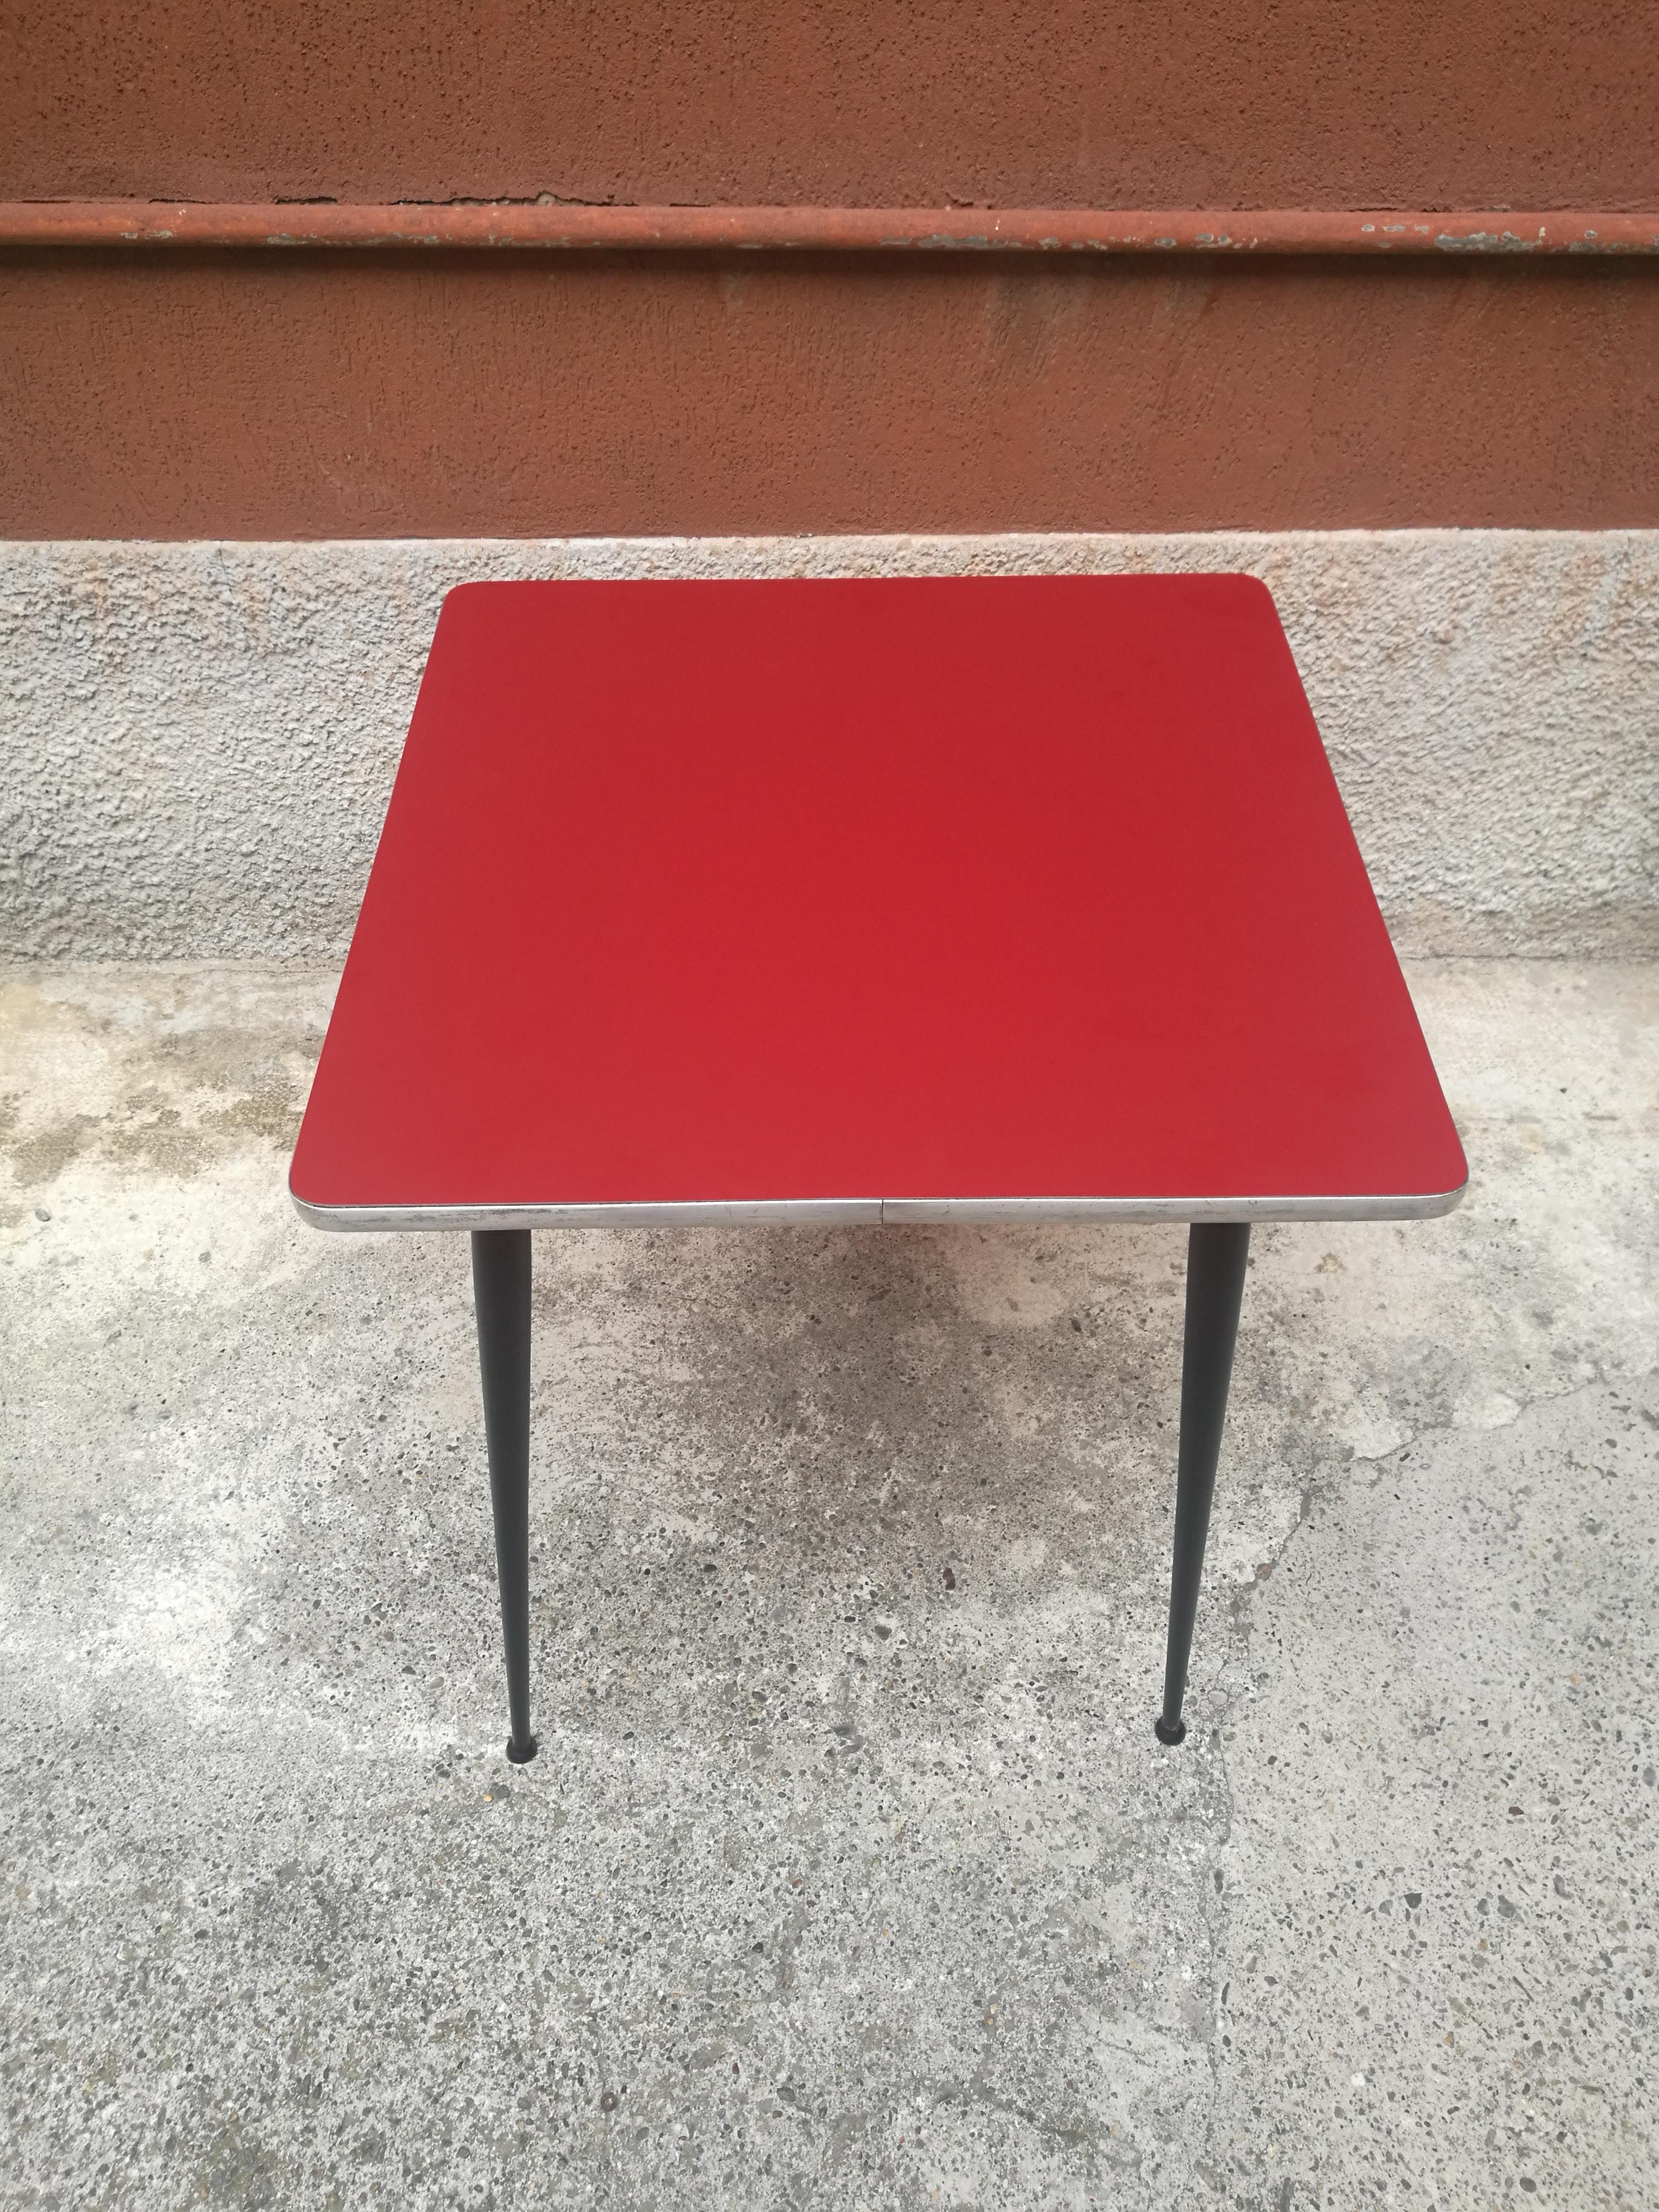 Mid-Century Modern Midcentury Italian Squared Red Formica Ad Metal Table from 1960s